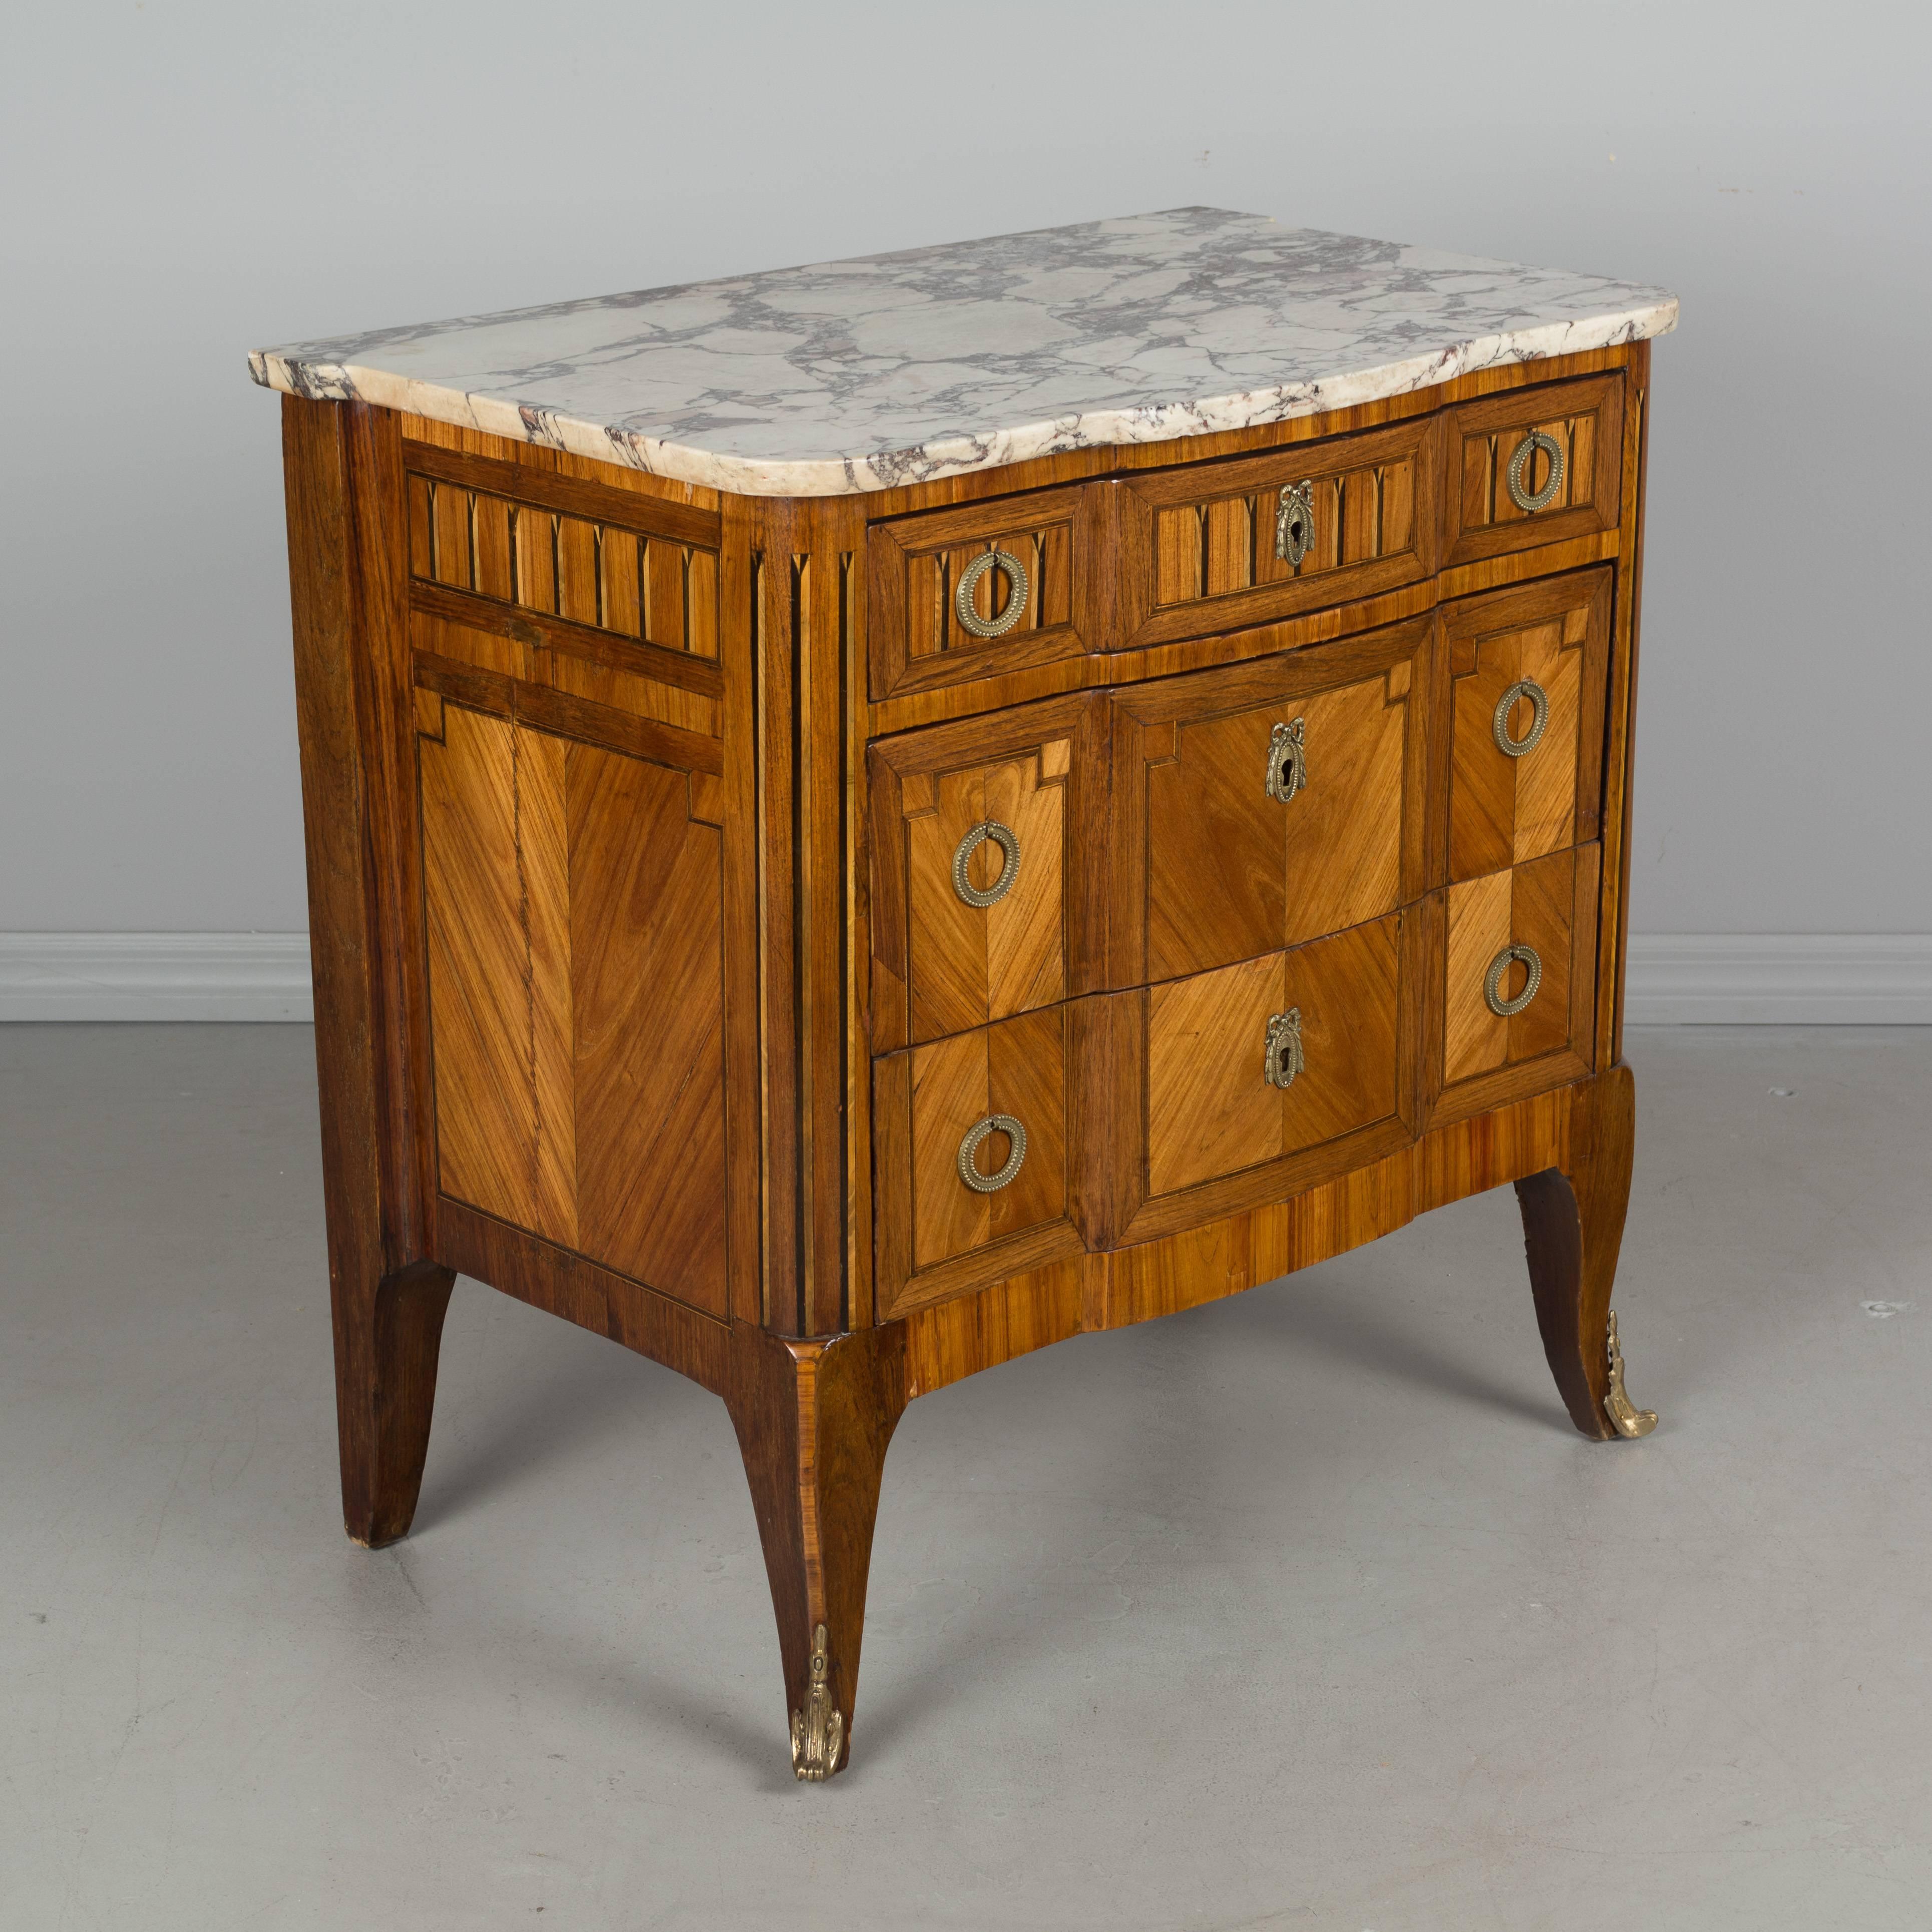 A 19th century French Louis XV style three-drawer marquetry commode inlaid with veneers of mahogany and tulipwood. Original marble top. Brass hardware and brass sabots on front legs. French polish finish. Locks are present, but there are no keys.